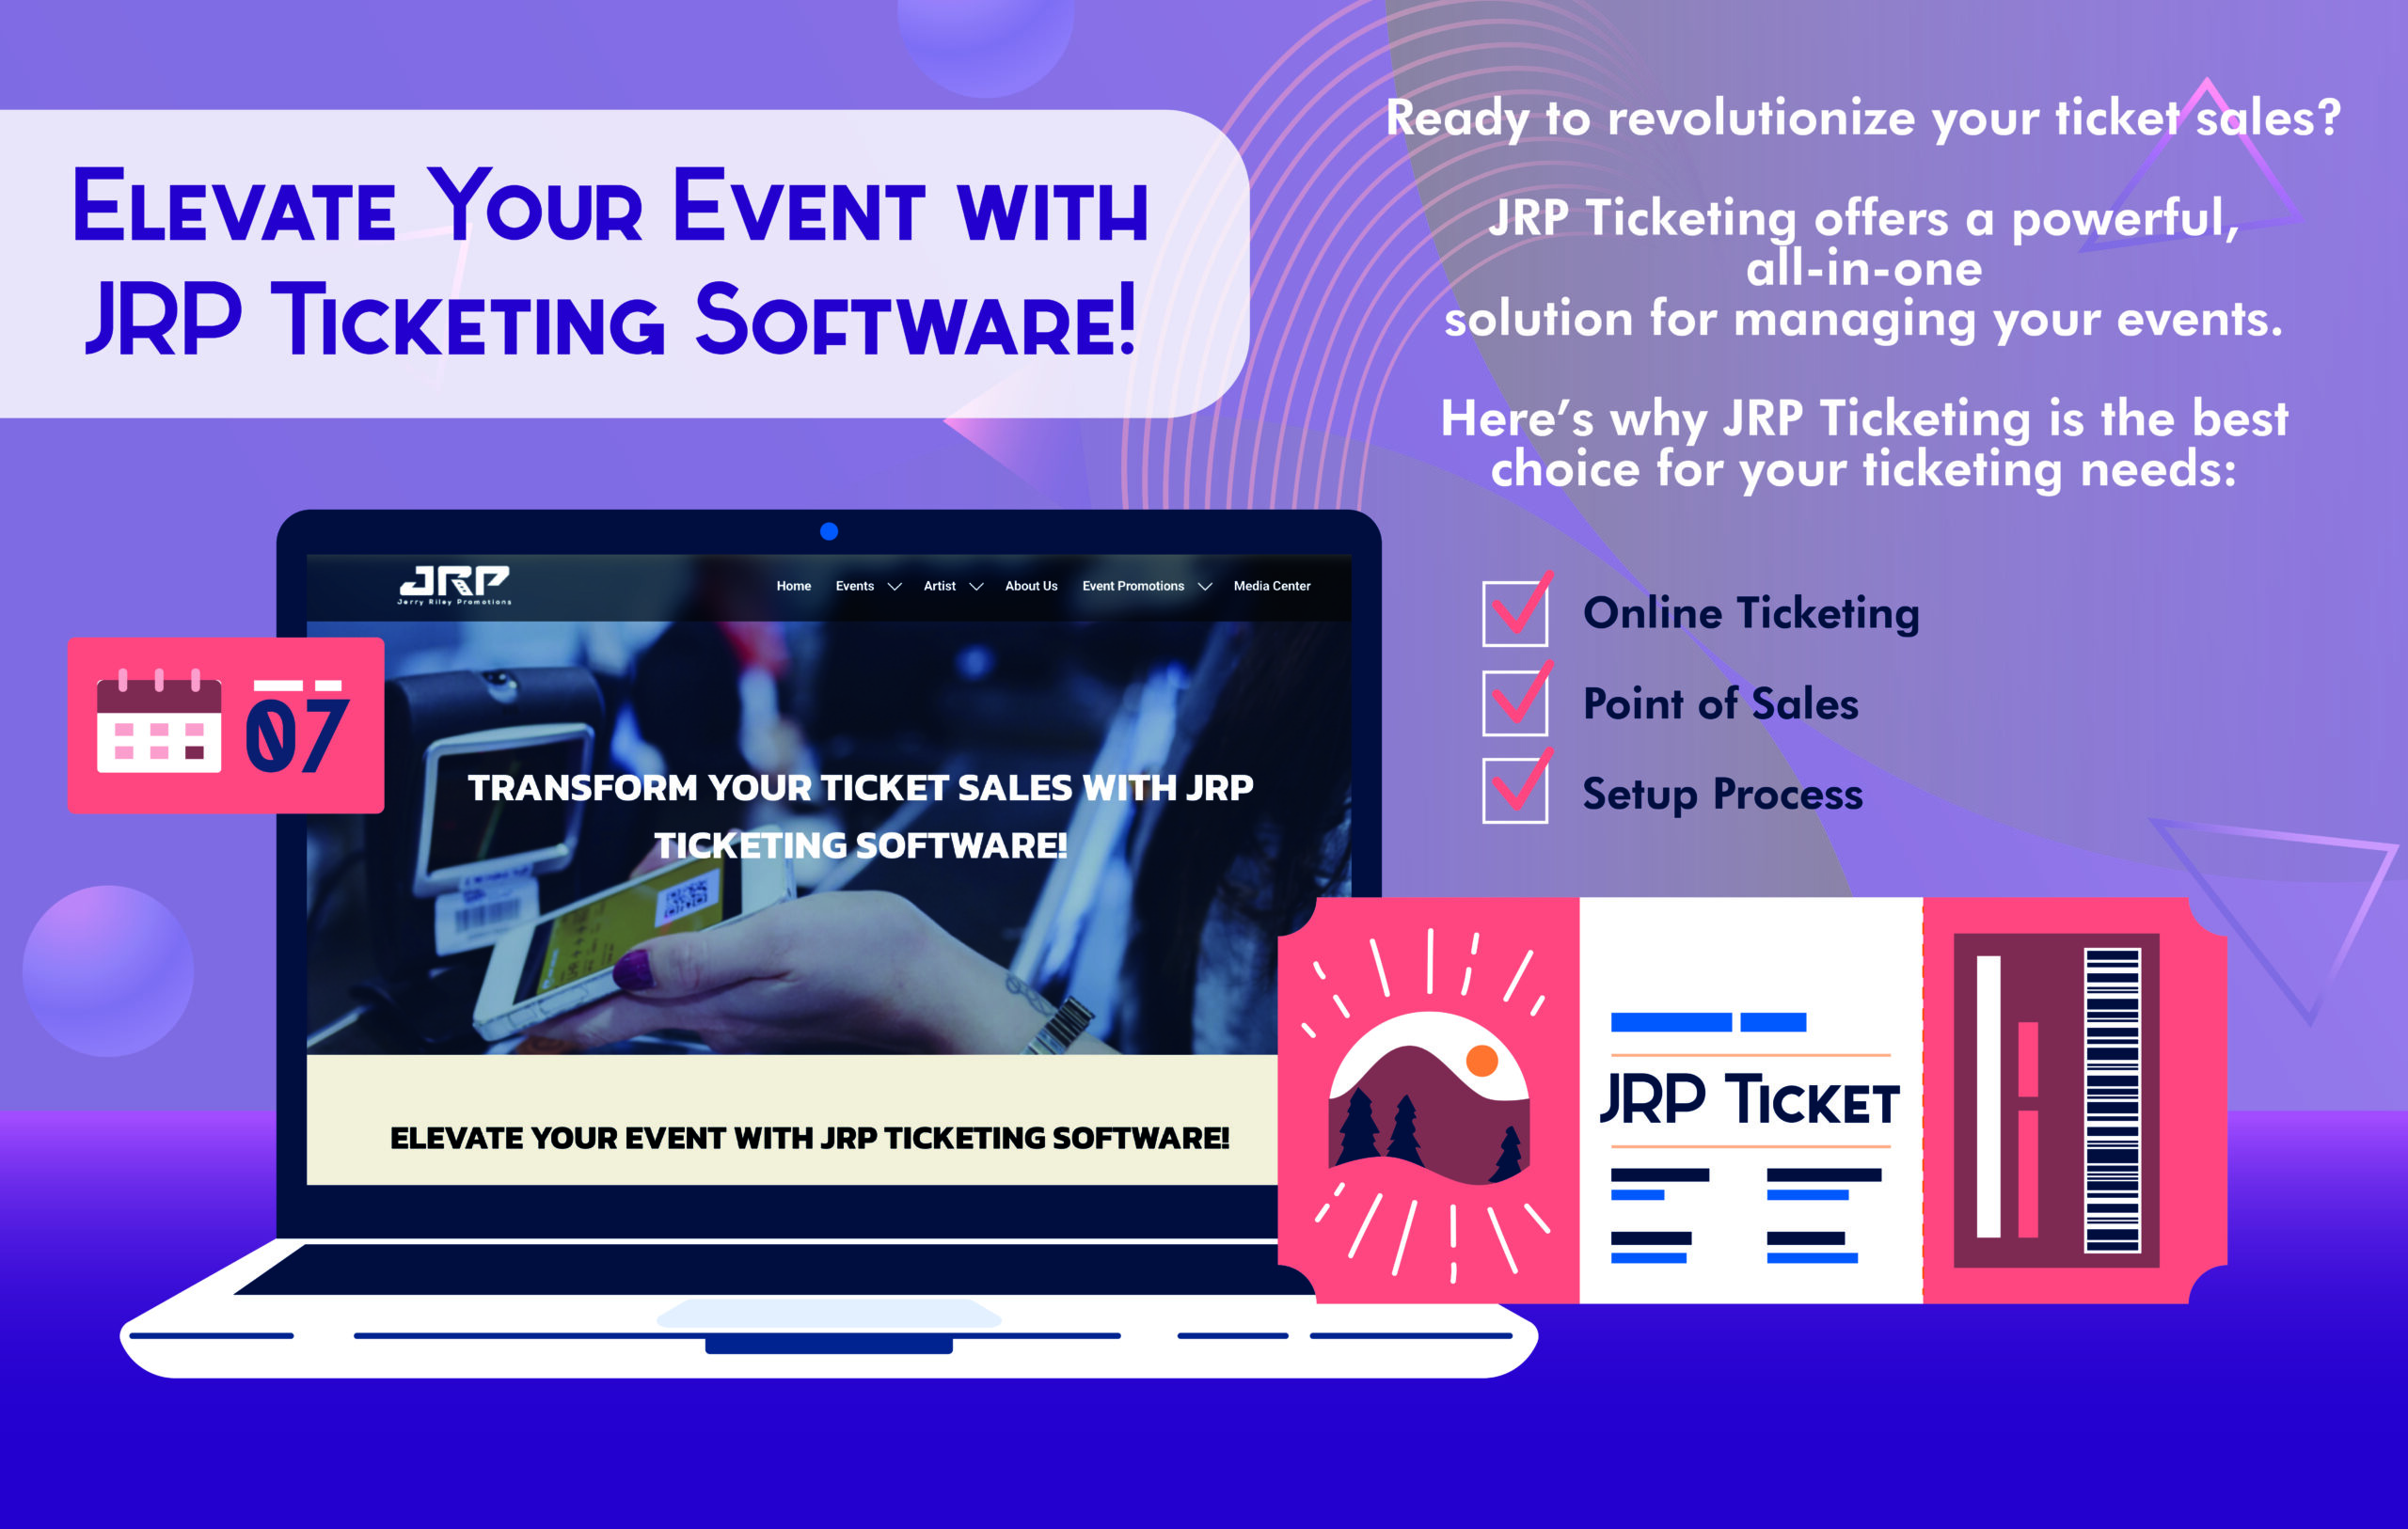 JRP Ticketing: The Ultimate Solution for Your Event Needs